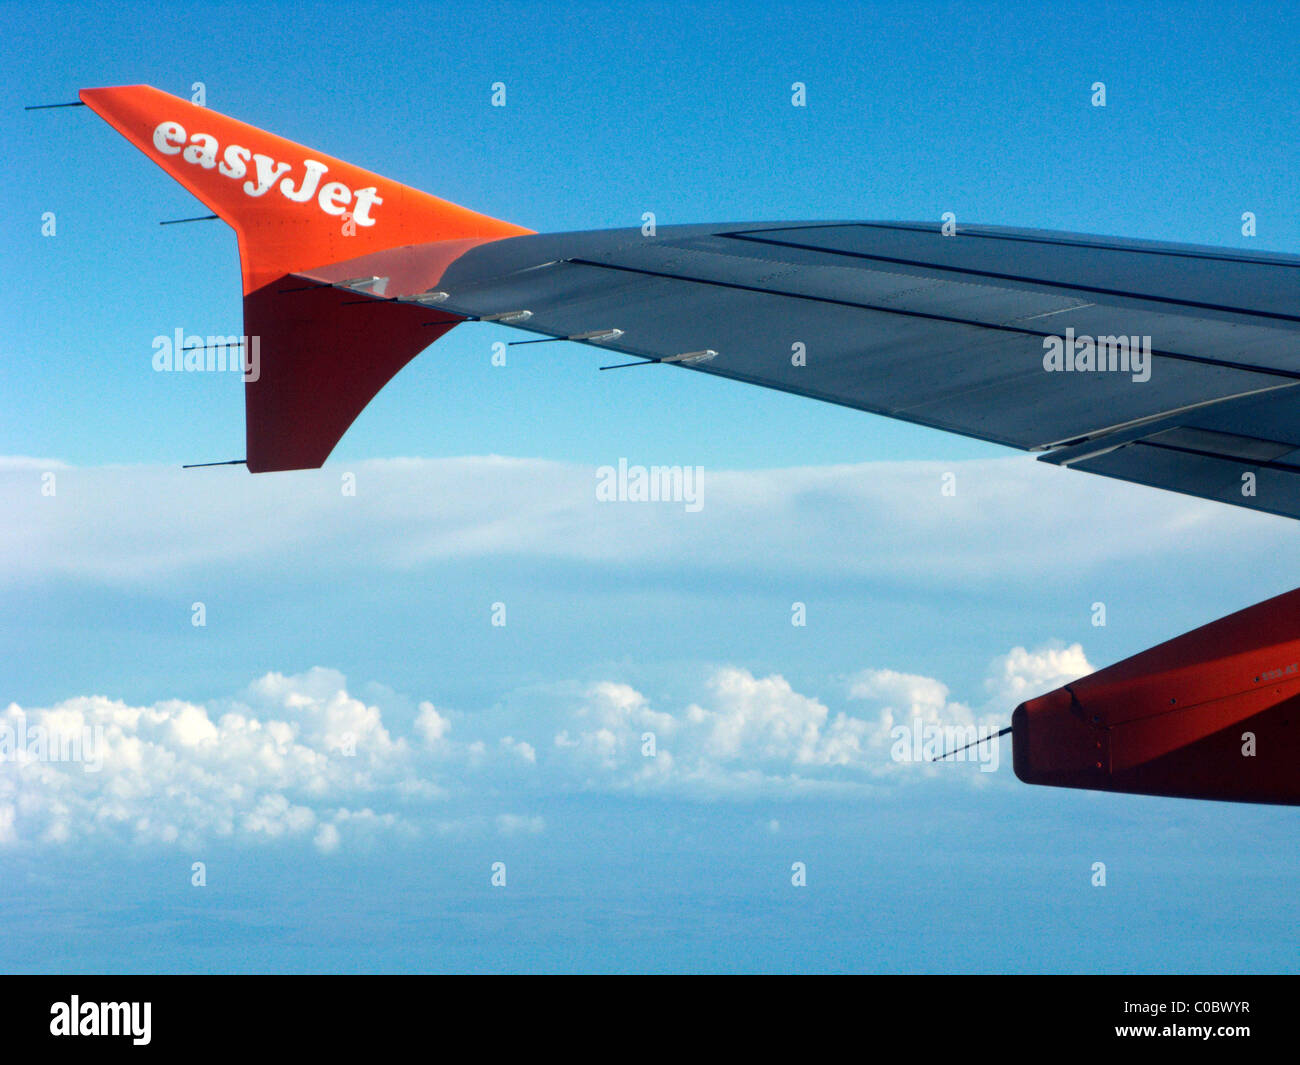 easyjet a319 airbus aircraft wing looking out through aircraft window showing ailerons and wingtip fence Stock Photo